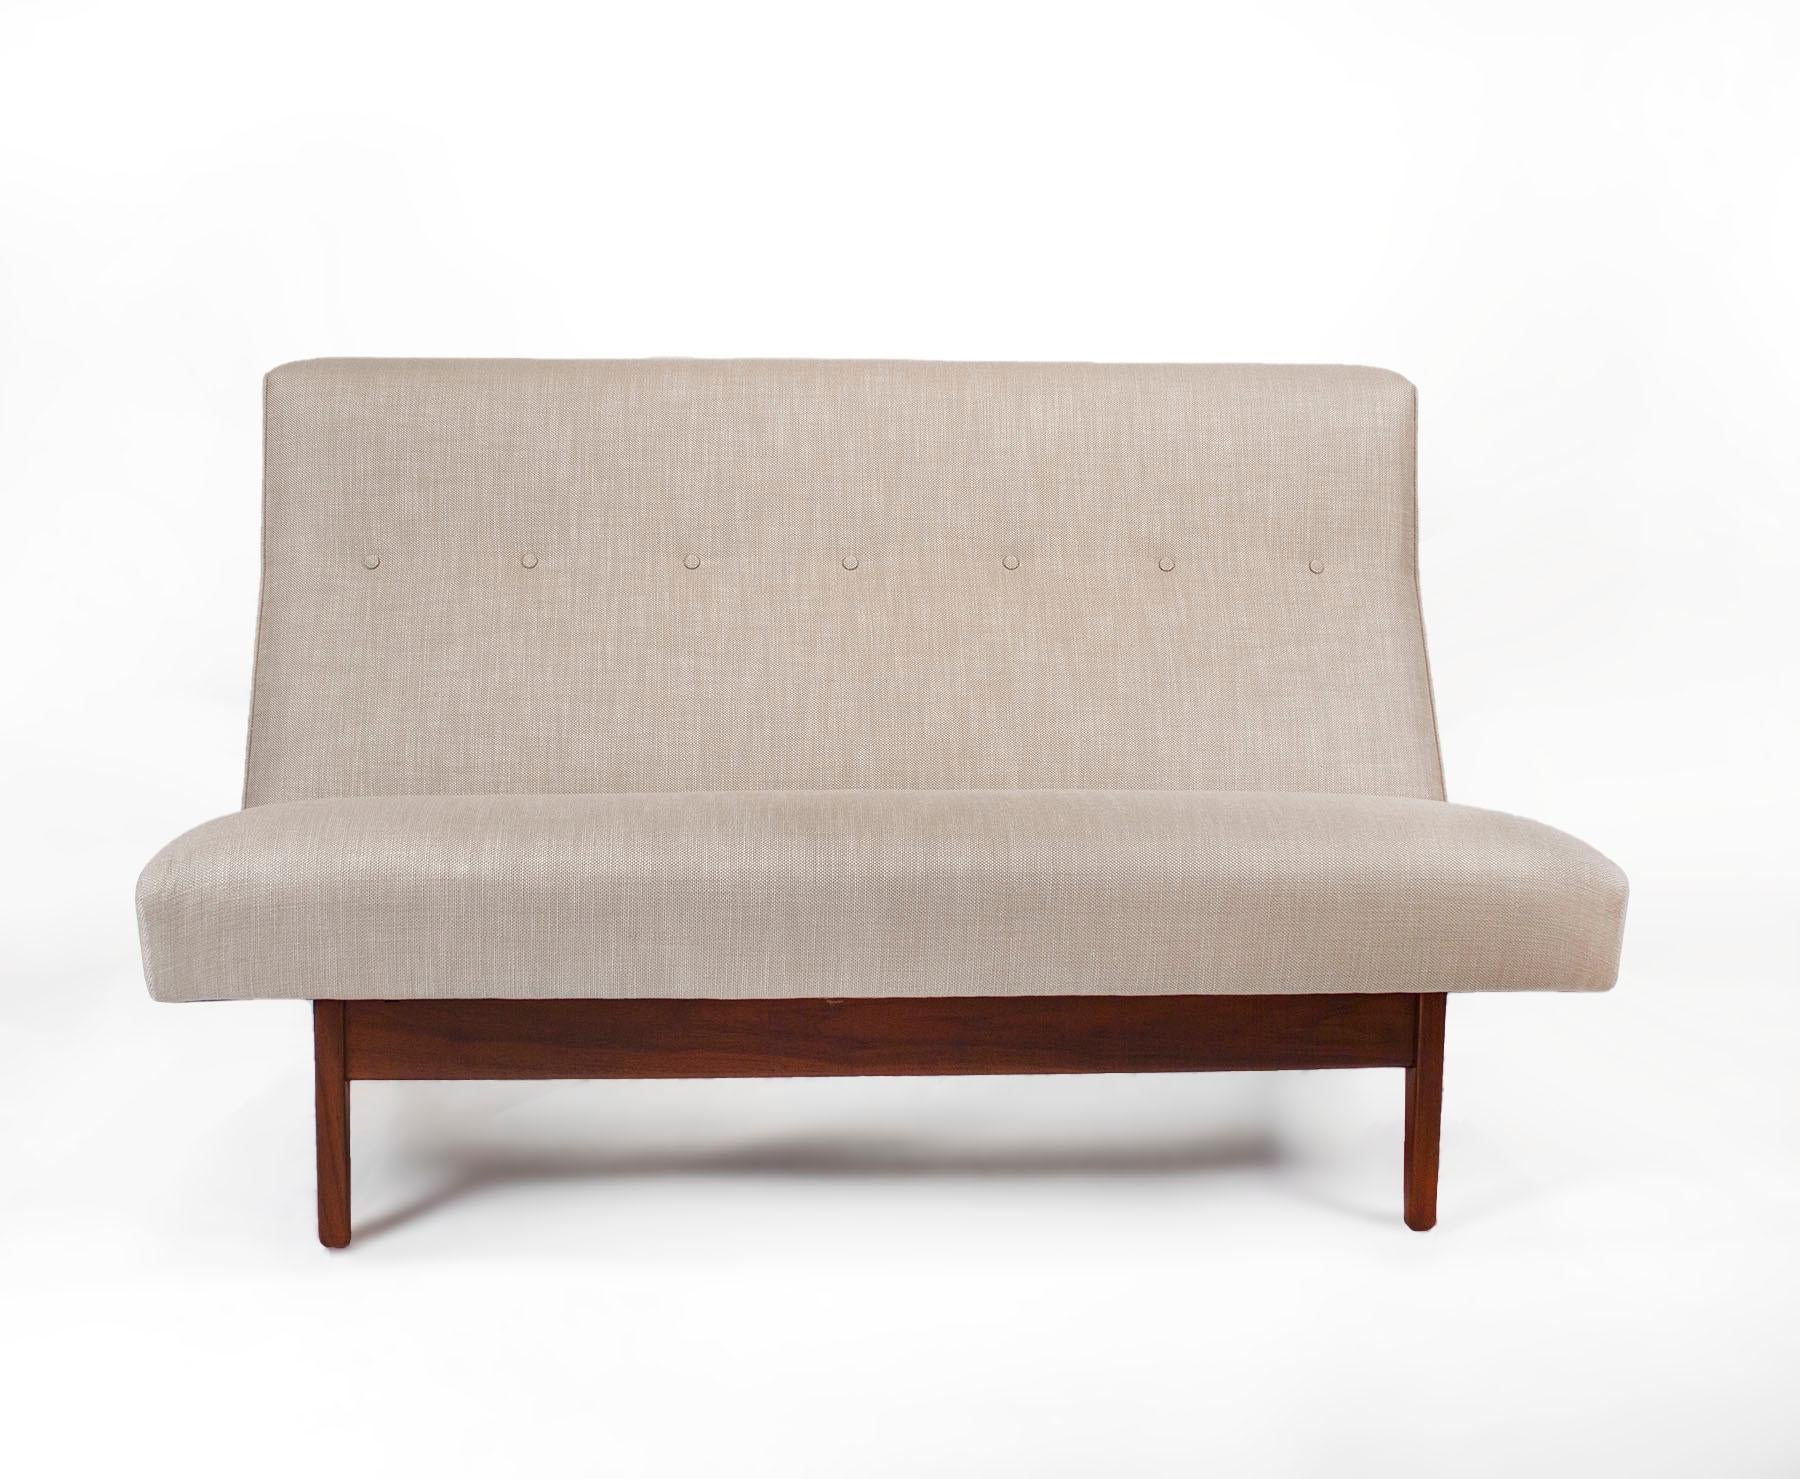 Mid-Century Modern Jens Risom Armless Settee in Walnut Cradle Frames with Linen Upholstery